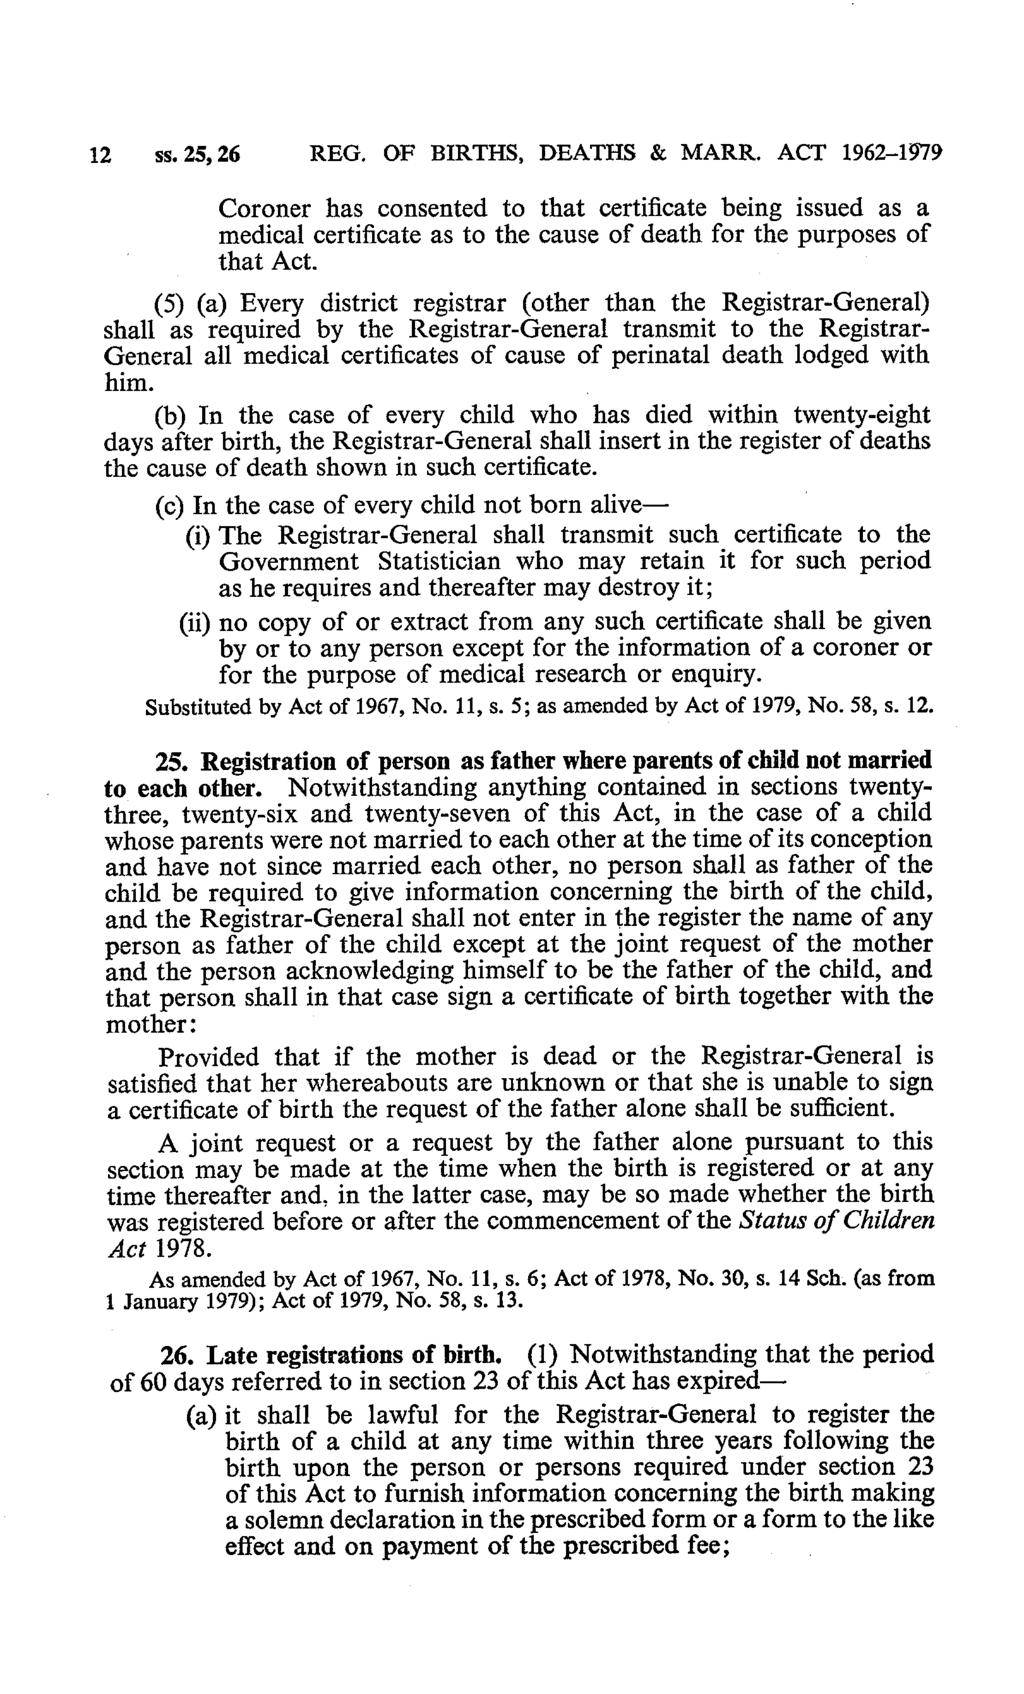 1 ss., REG. OF BIRTHS, DEATHS & MARR. ACT 19-199 Coroner has consented to that certificate being issued as a medical certificate as to the cause of death for the purposes of that Act.